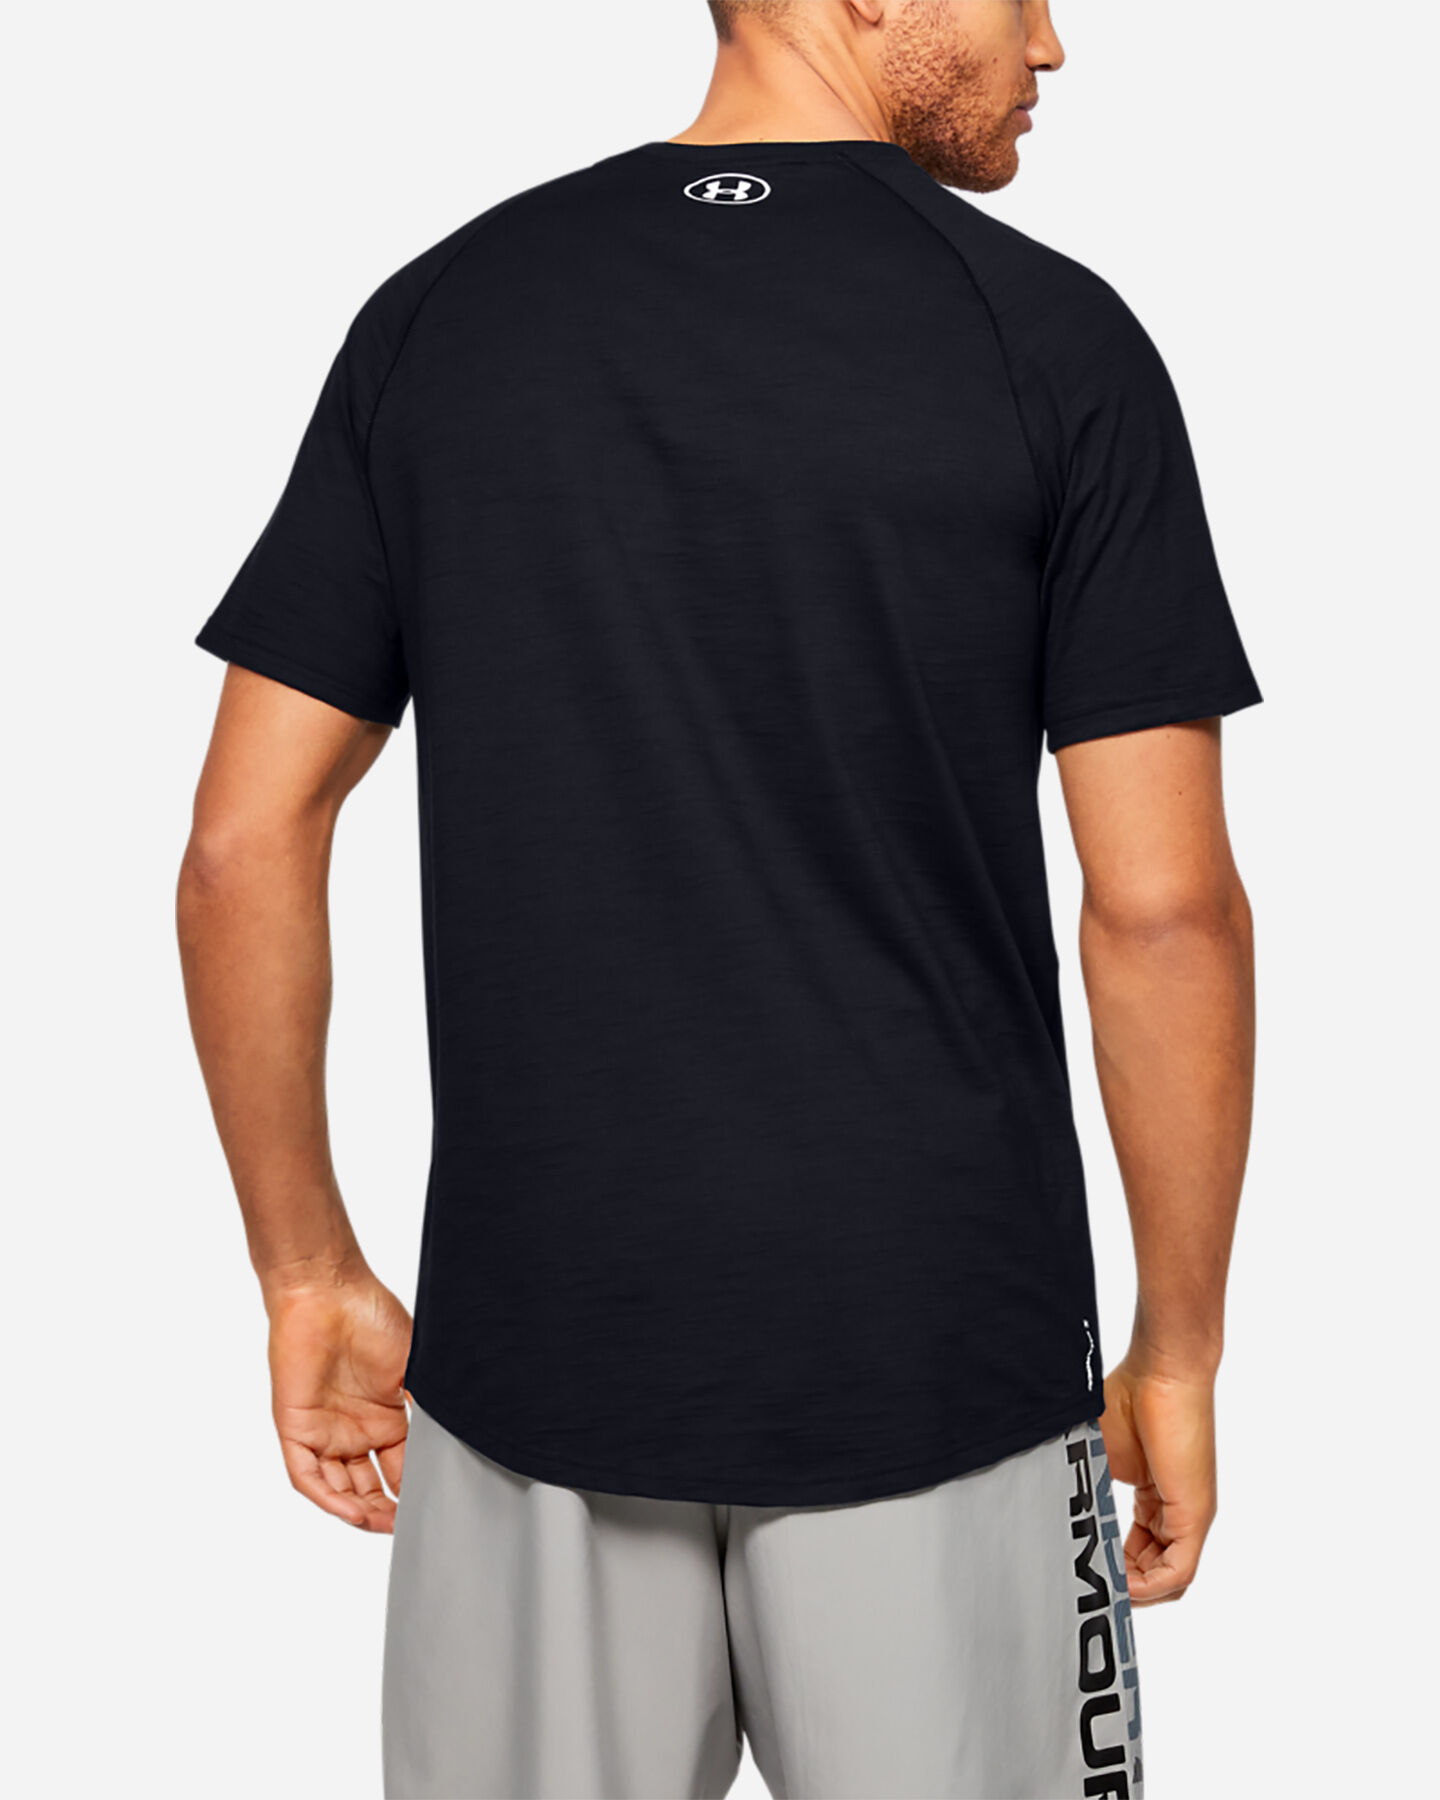  T-Shirt training UNDER ARMOUR CHARGED M S5169035|0001|SM scatto 4